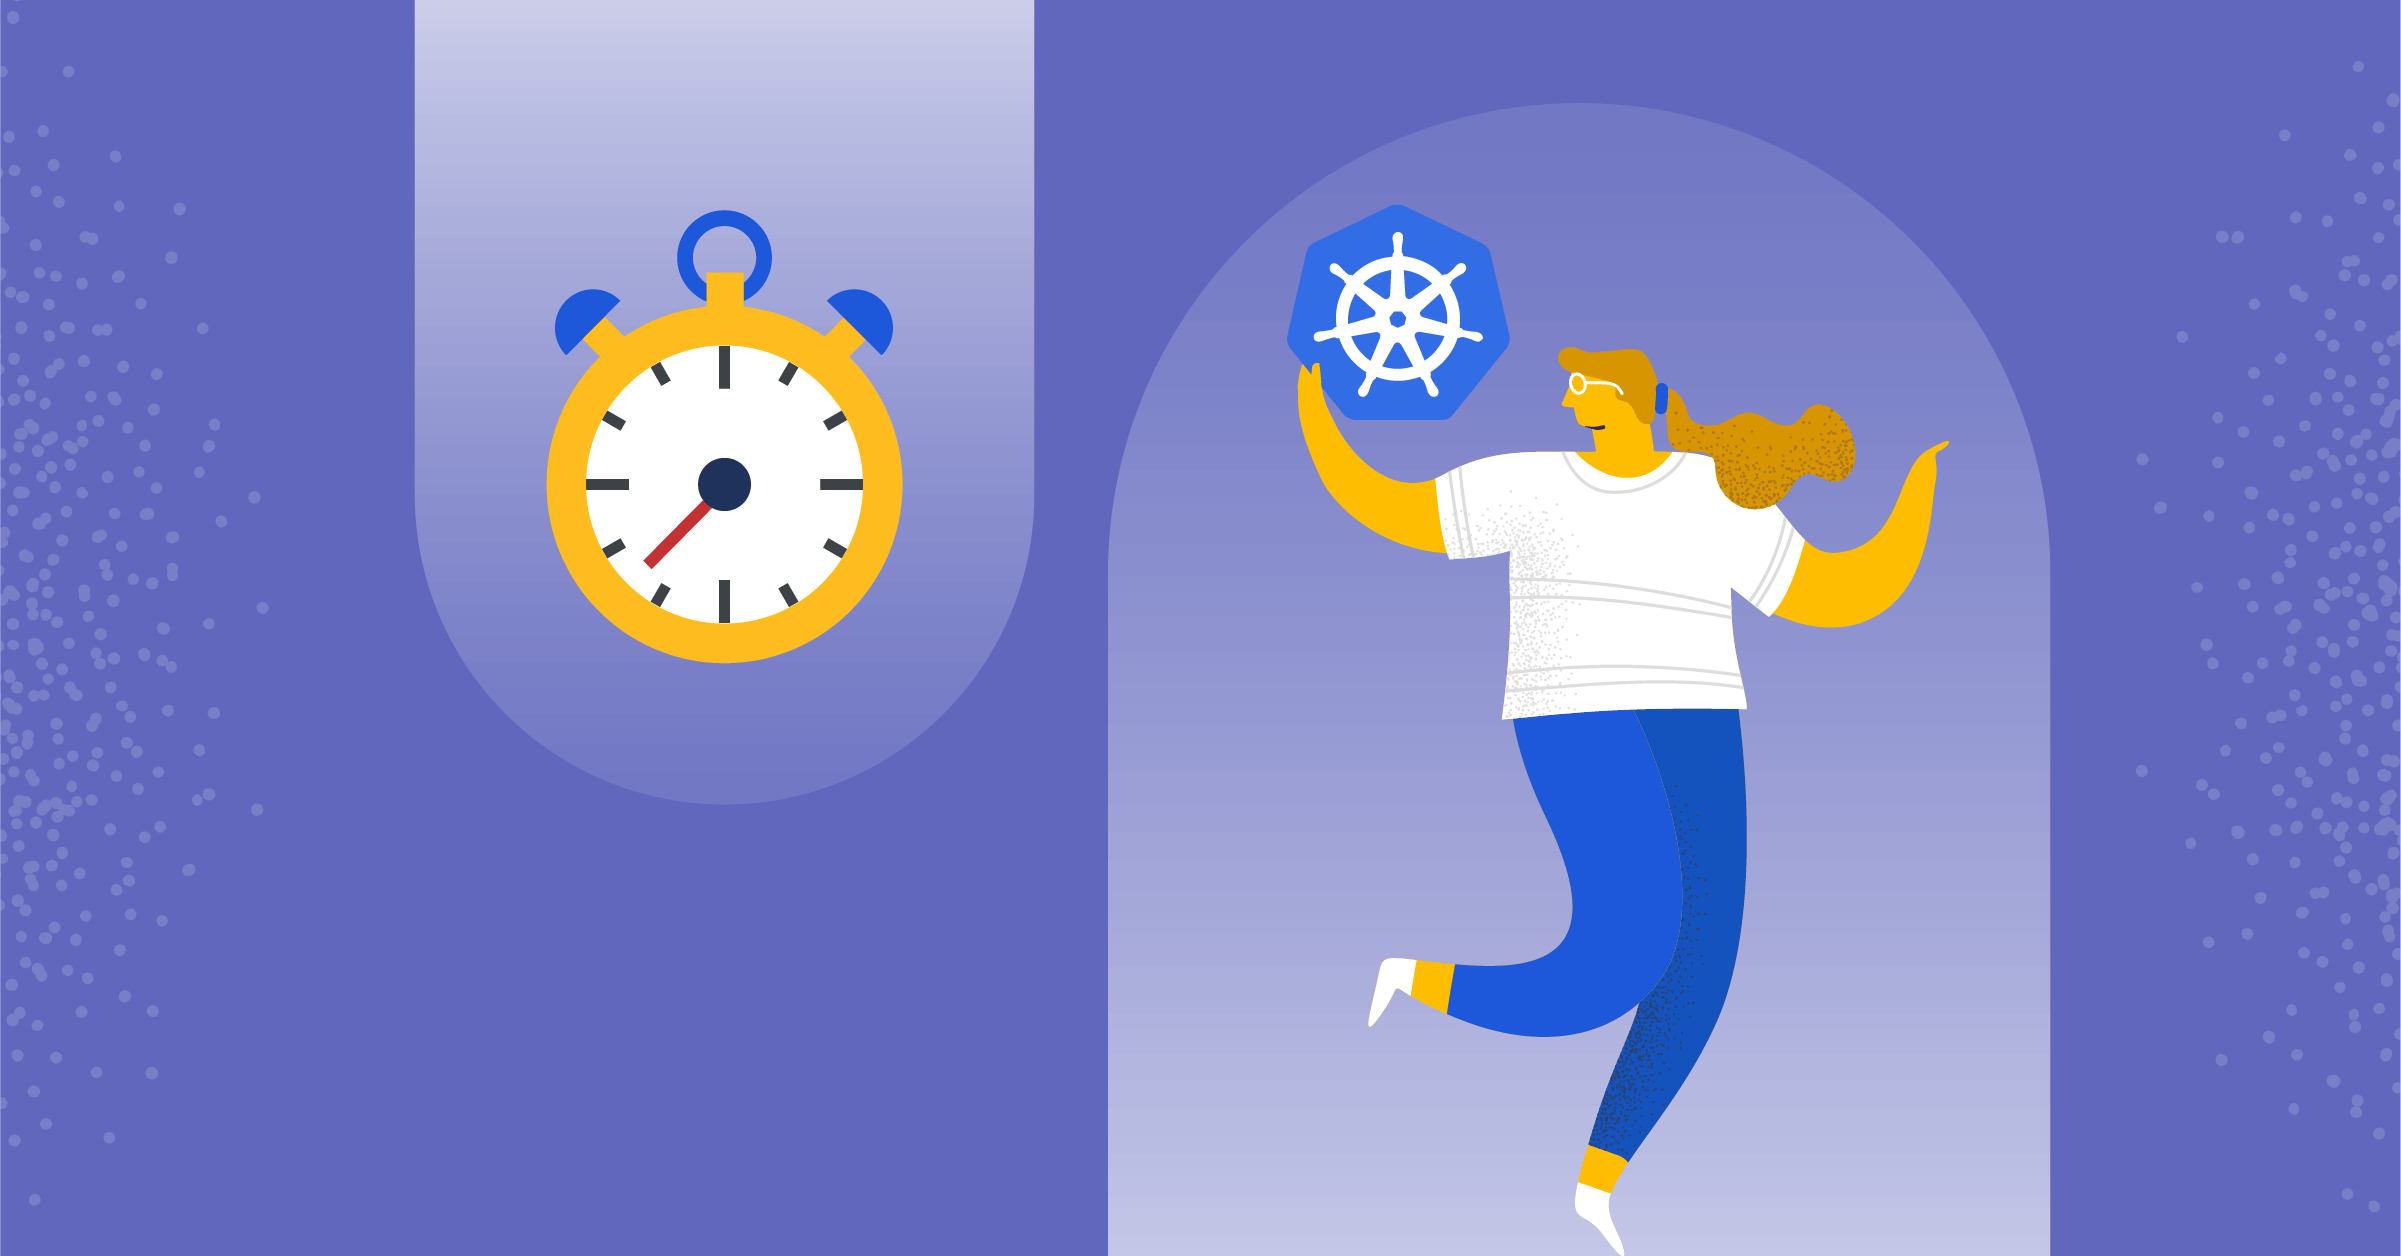 How to get started with Mattermost on Kubernetes